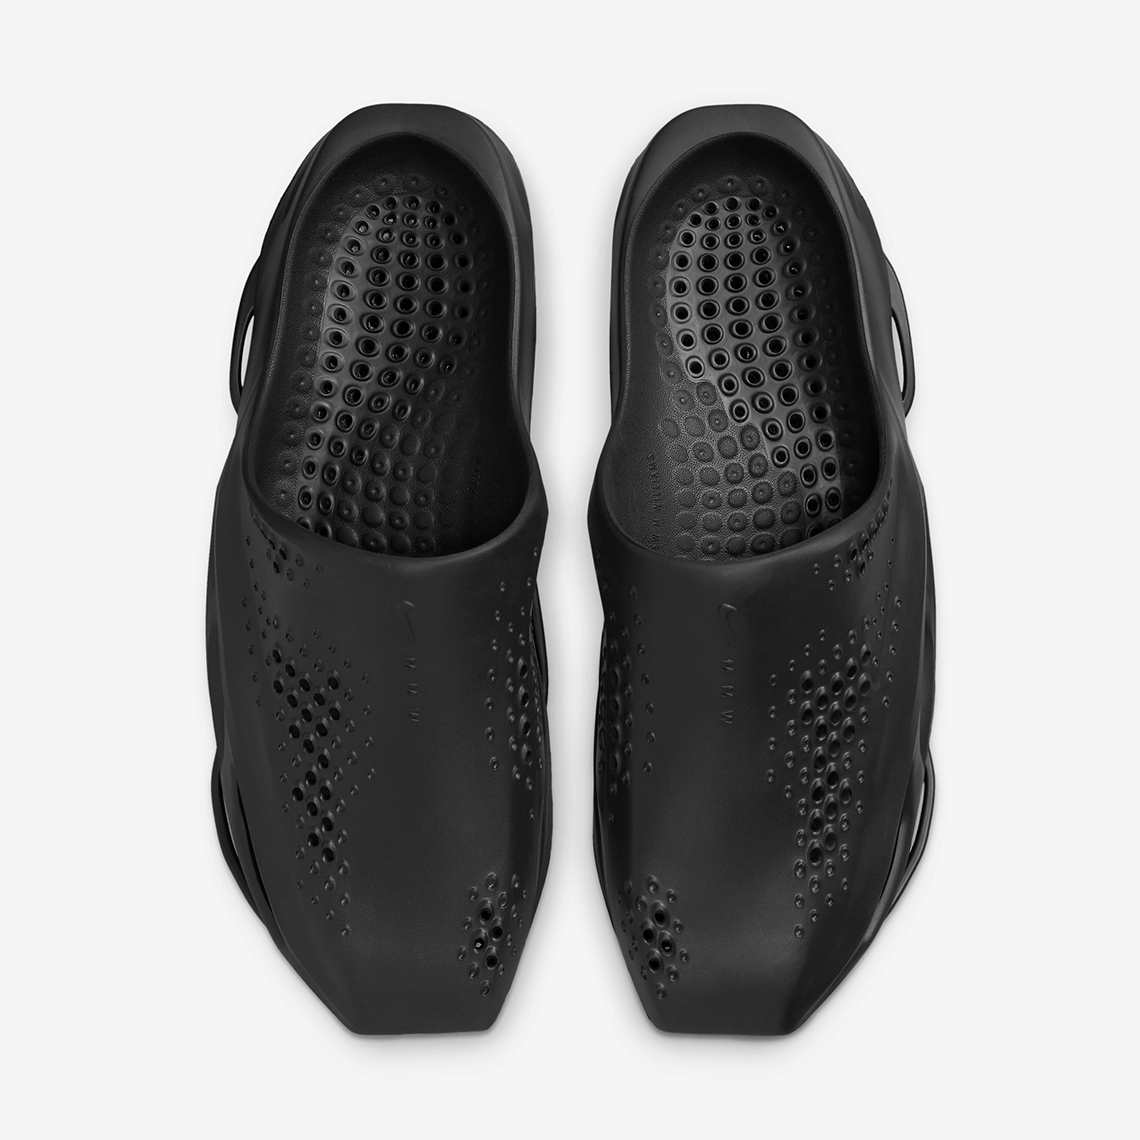 Just launched. @nike x MMW 005, a slide designed to take you to